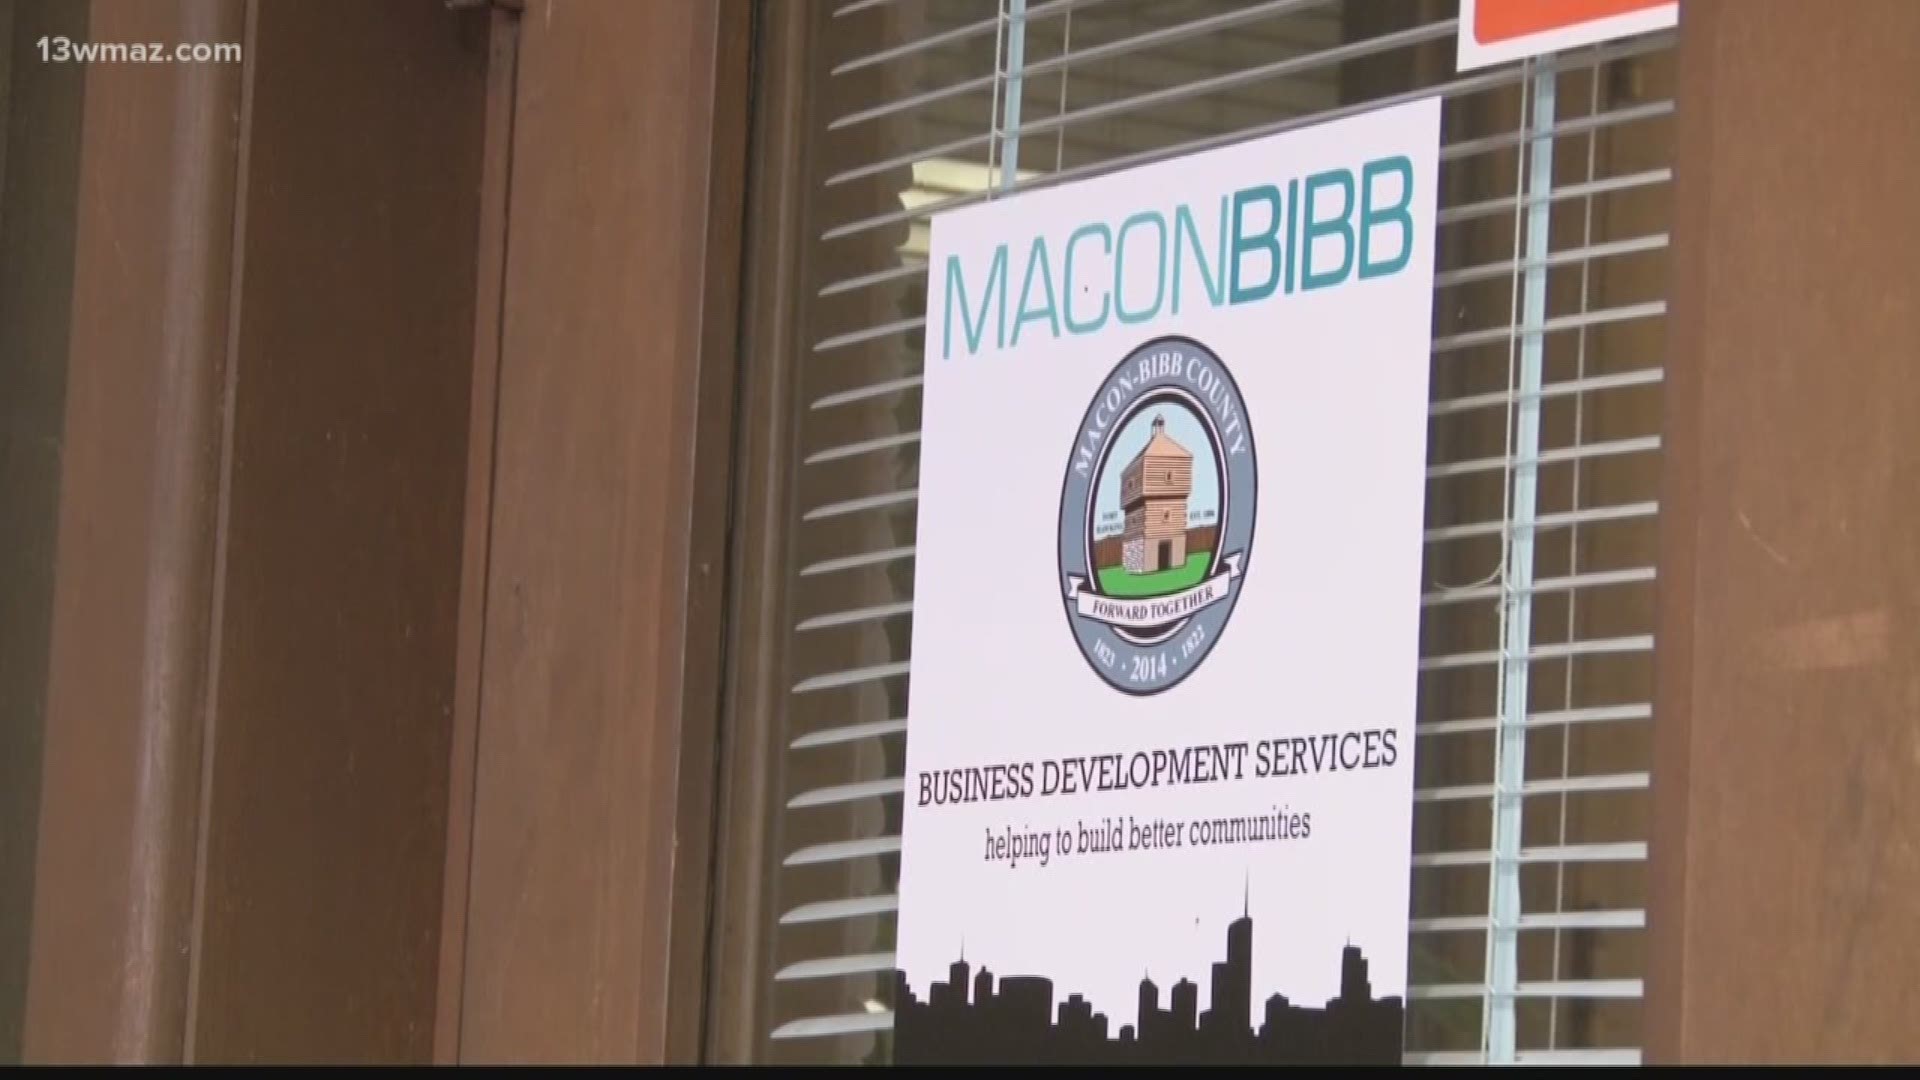 Bibb County could be missing out on some revenue from its tax on business owners. Some owners say they are being hit with past due bills and added fines.